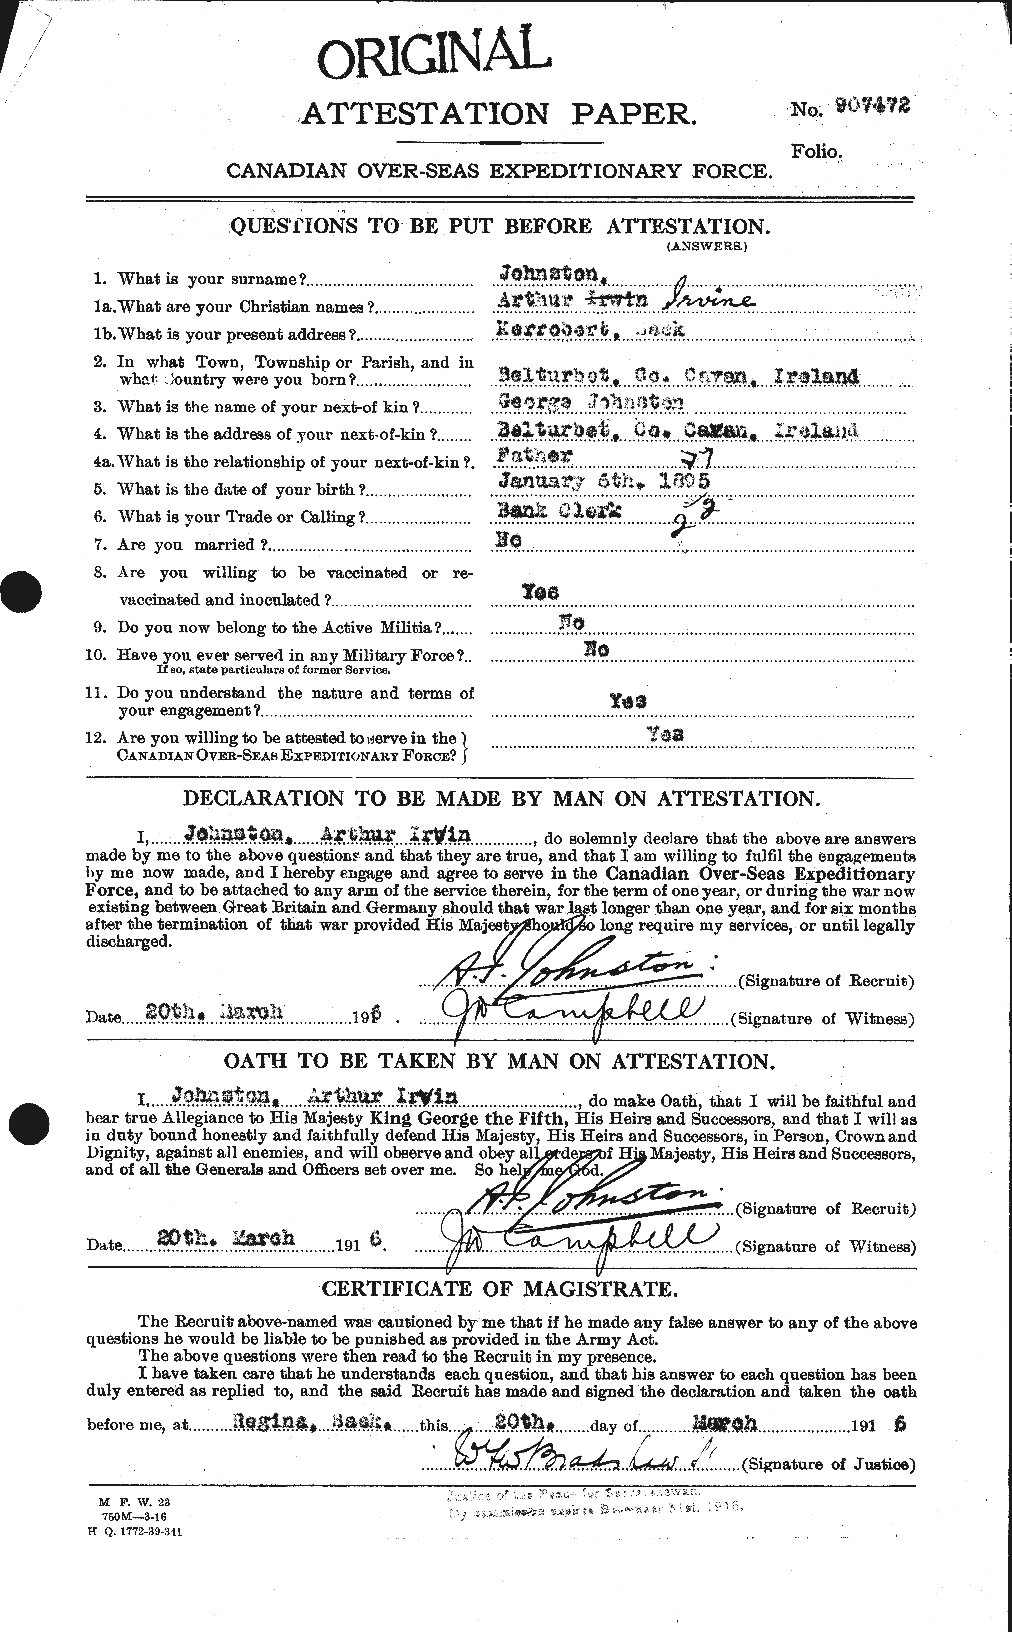 Personnel Records of the First World War - CEF 421048a